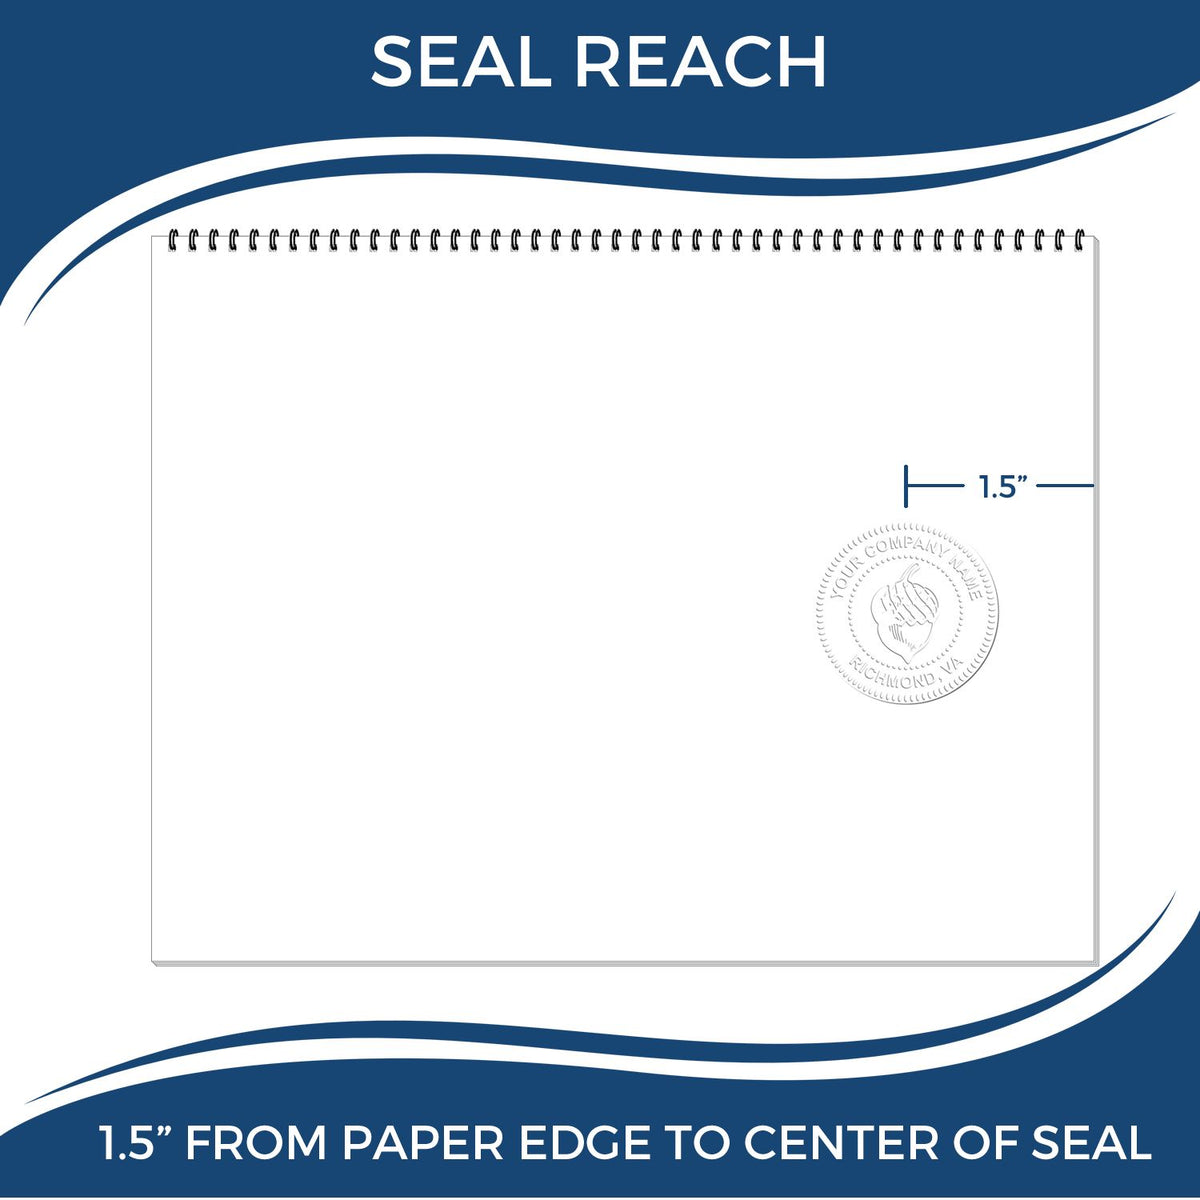 An infographic showing the seal reach which is represented by a ruler and a miniature seal image of the Hybrid Virginia Landscape Architect Seal